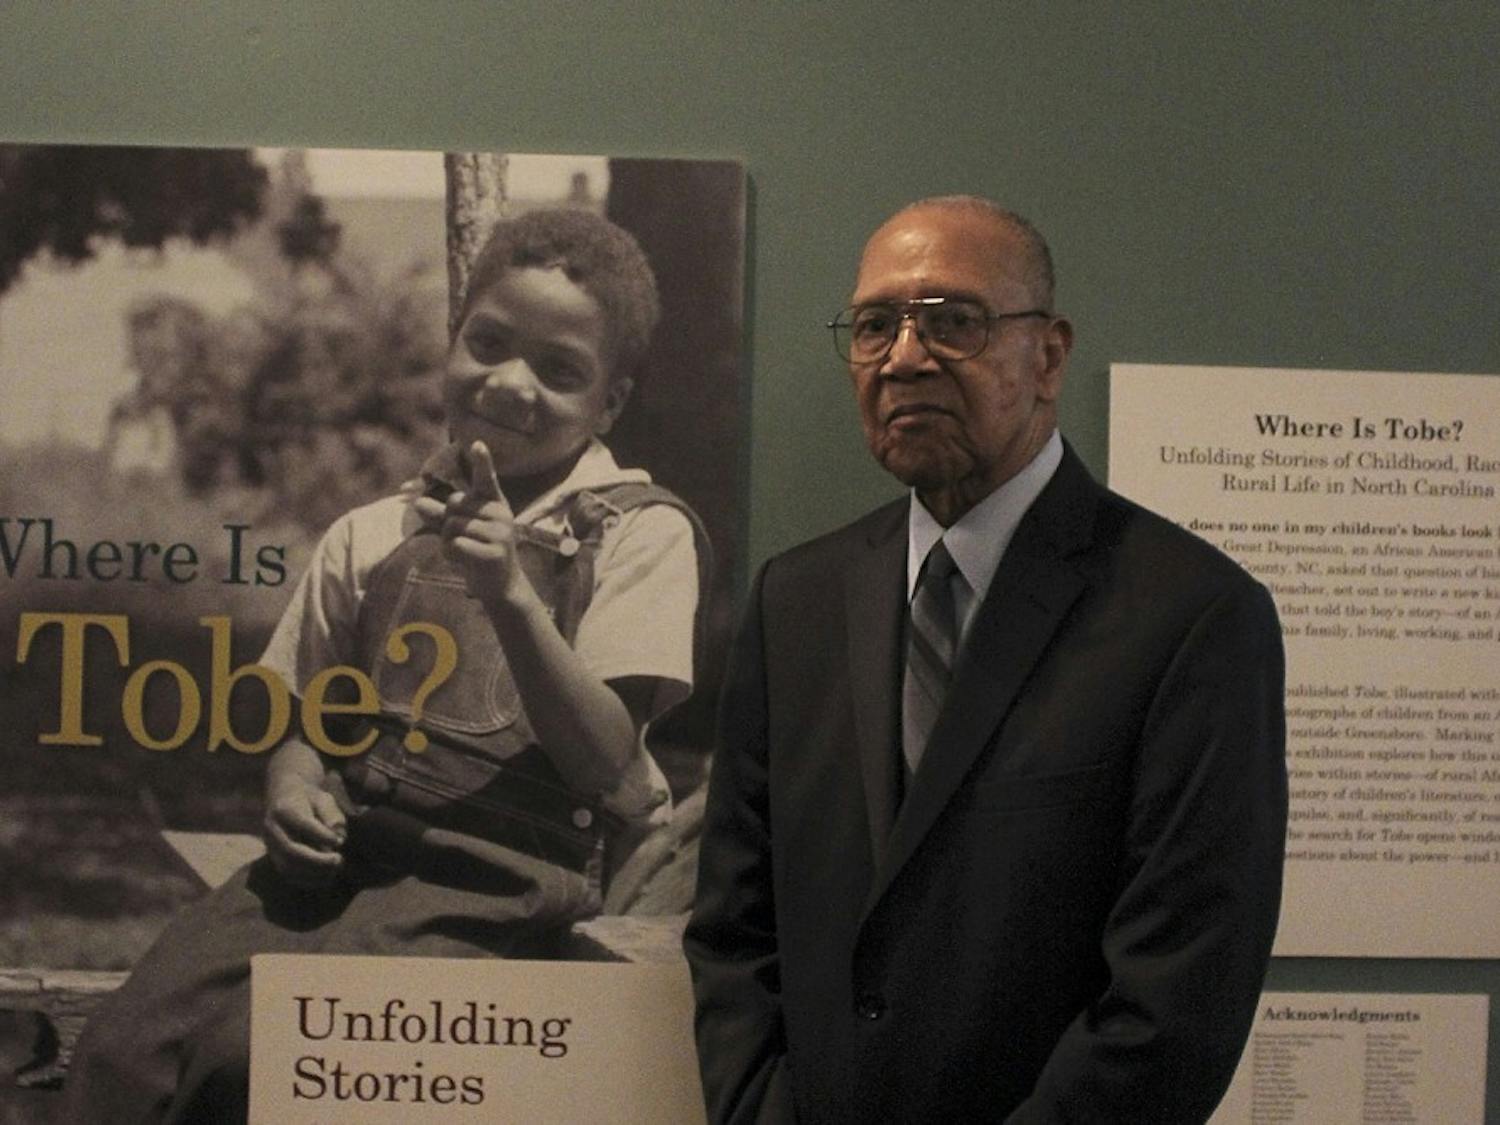 Charles Garner stands next to the book cover of "Tobe," which features a photograph taken of him as a child.   This photo is hanging in the North Carolina Collections Gallery, of Wilson Library.